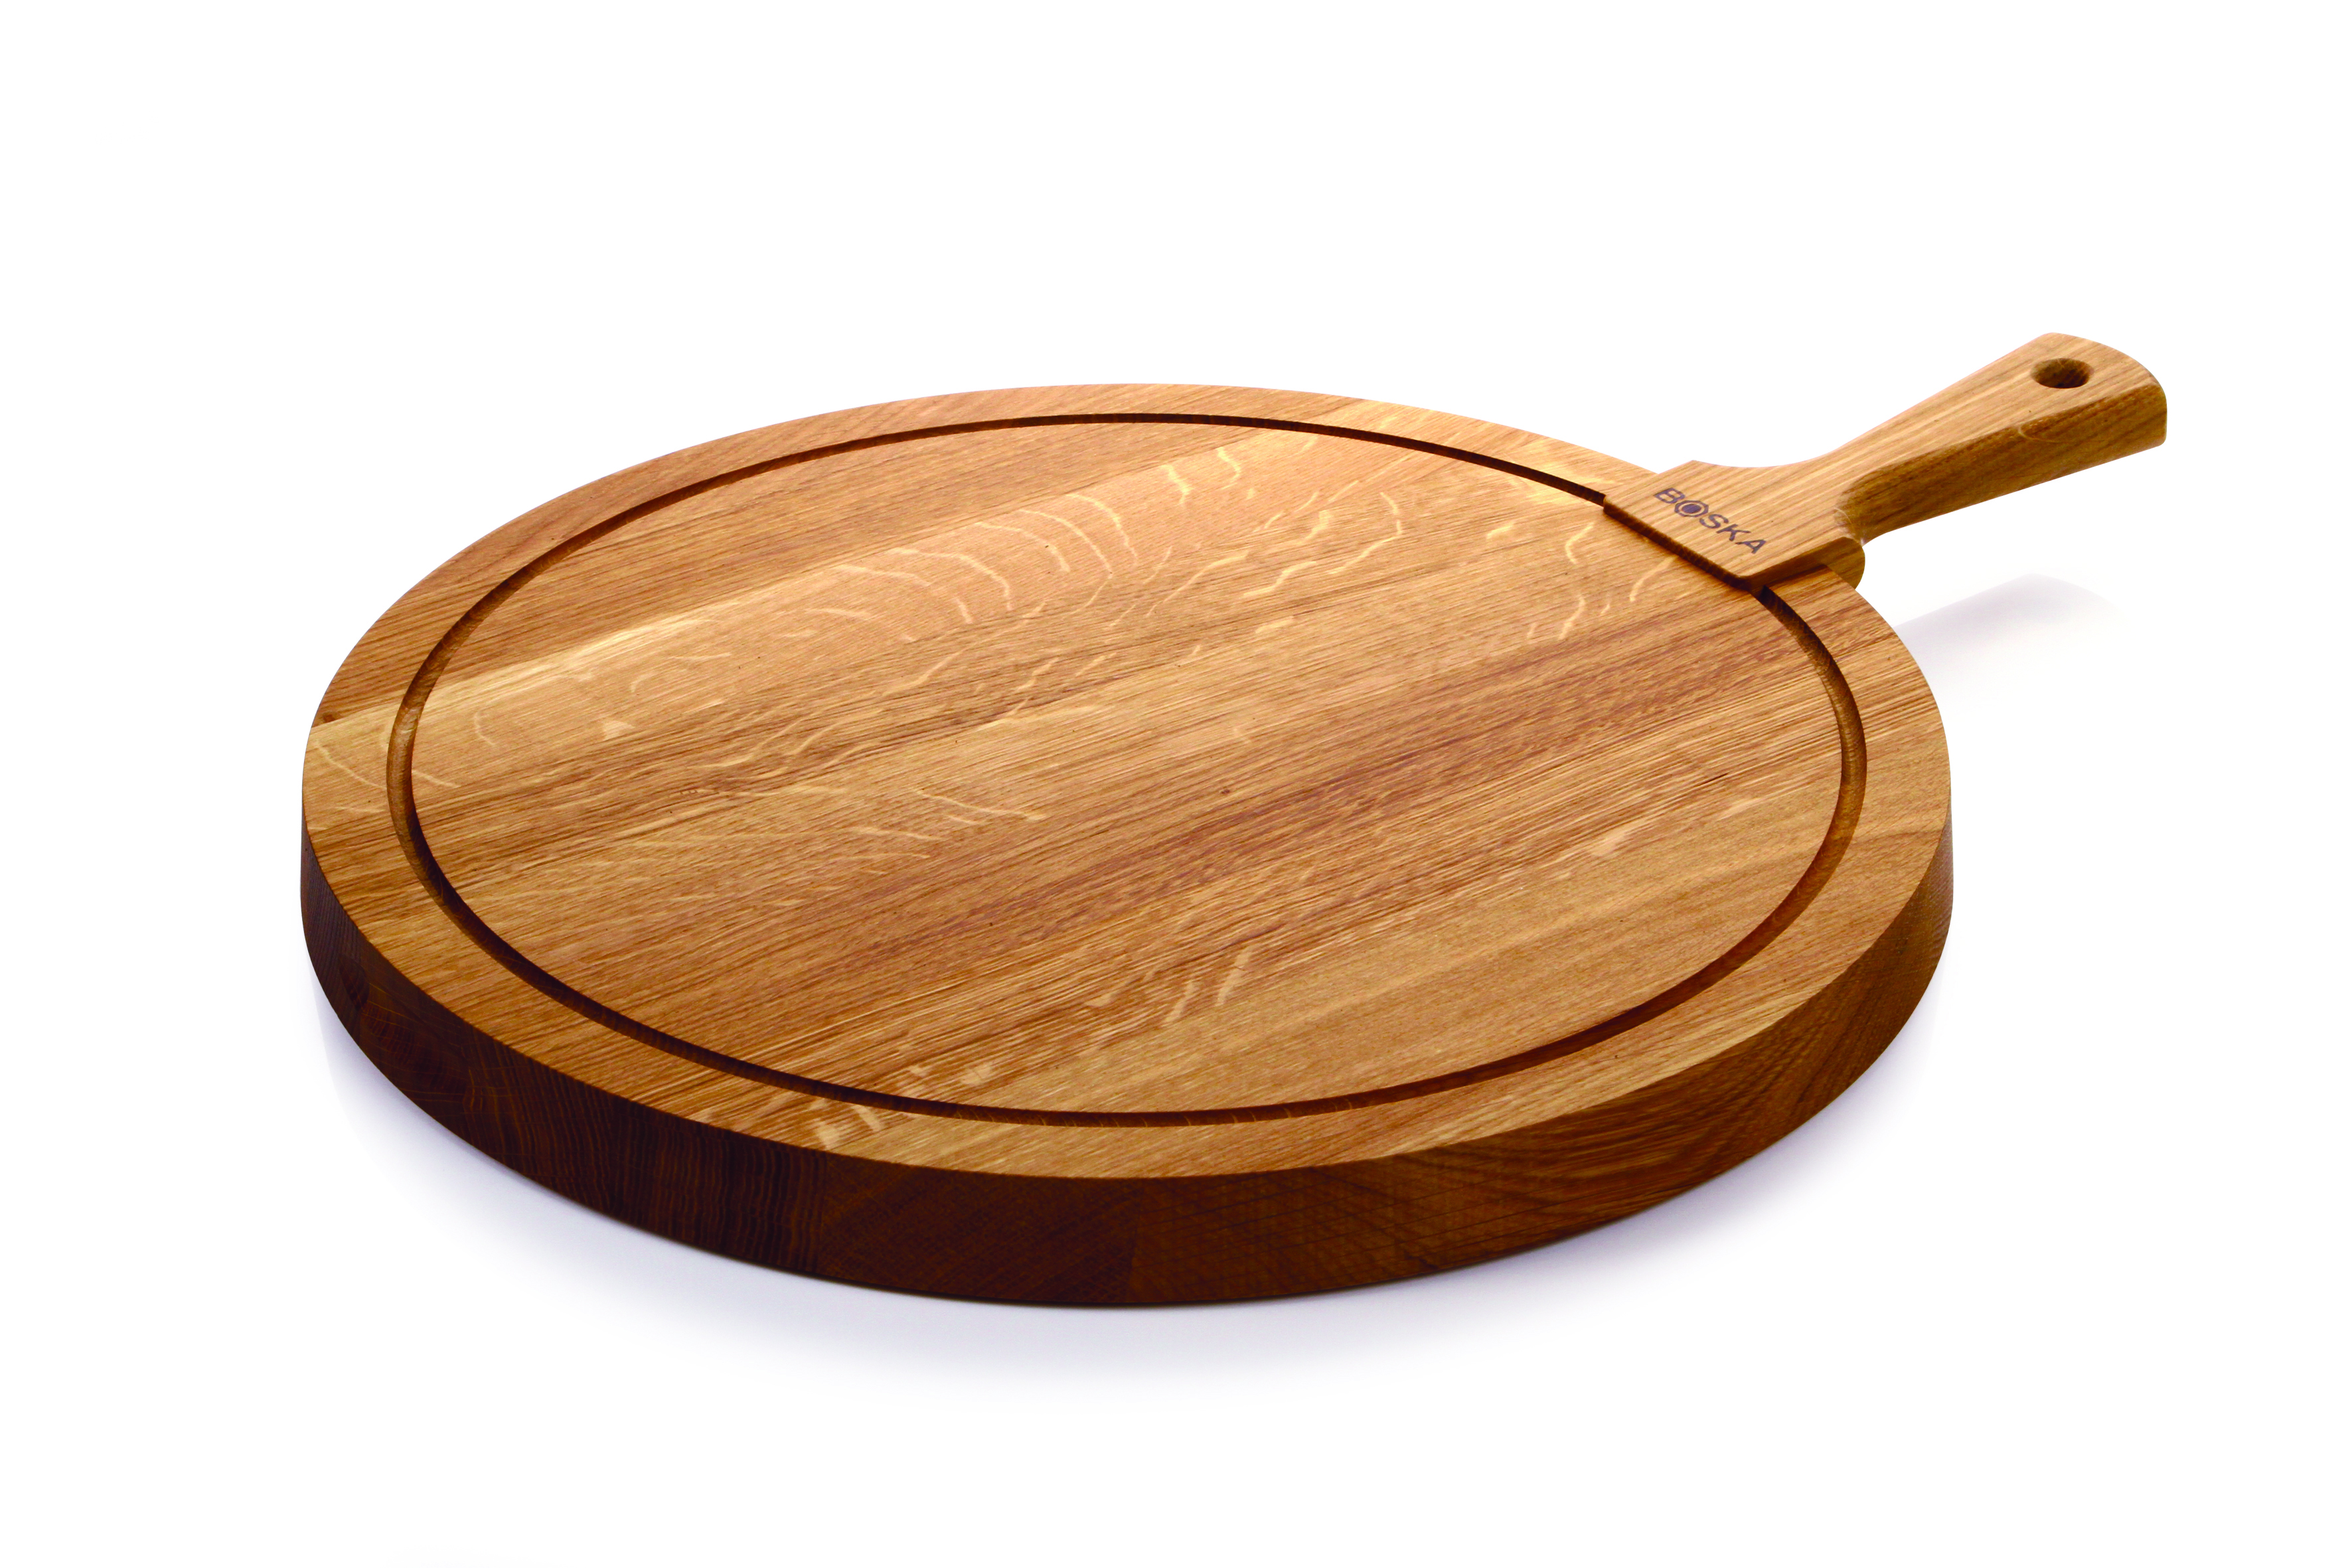 Boska Round Wood Cheese Board Large, Round Wooden Cheese Board